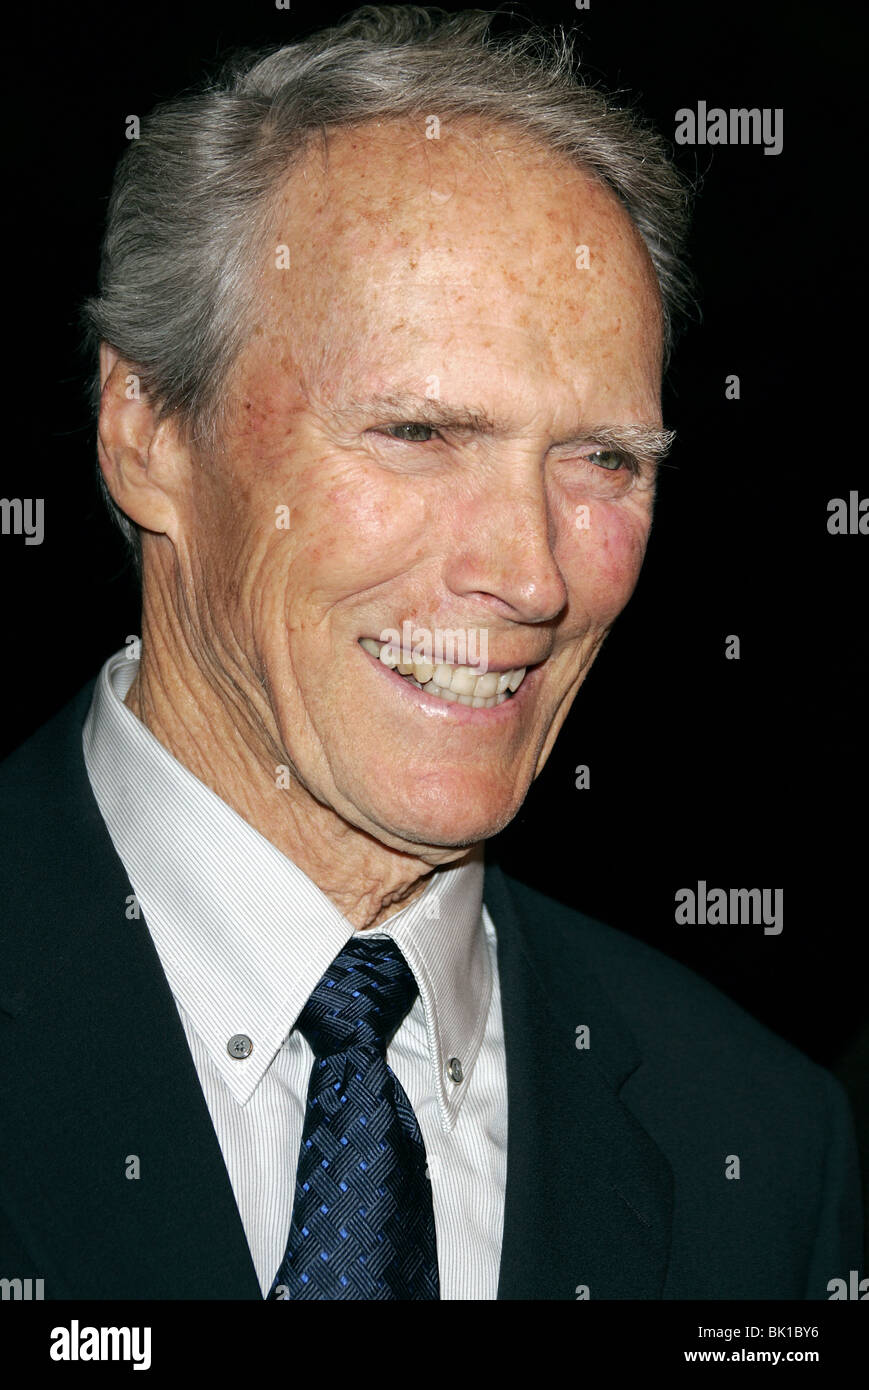 CLINT EASTWOOD FLAGS OF OUR FATHERS PREMIERE BEVERLY HILLS LOS ANGELES Kalifornien USA 9. Oktober 2006 Stockfoto